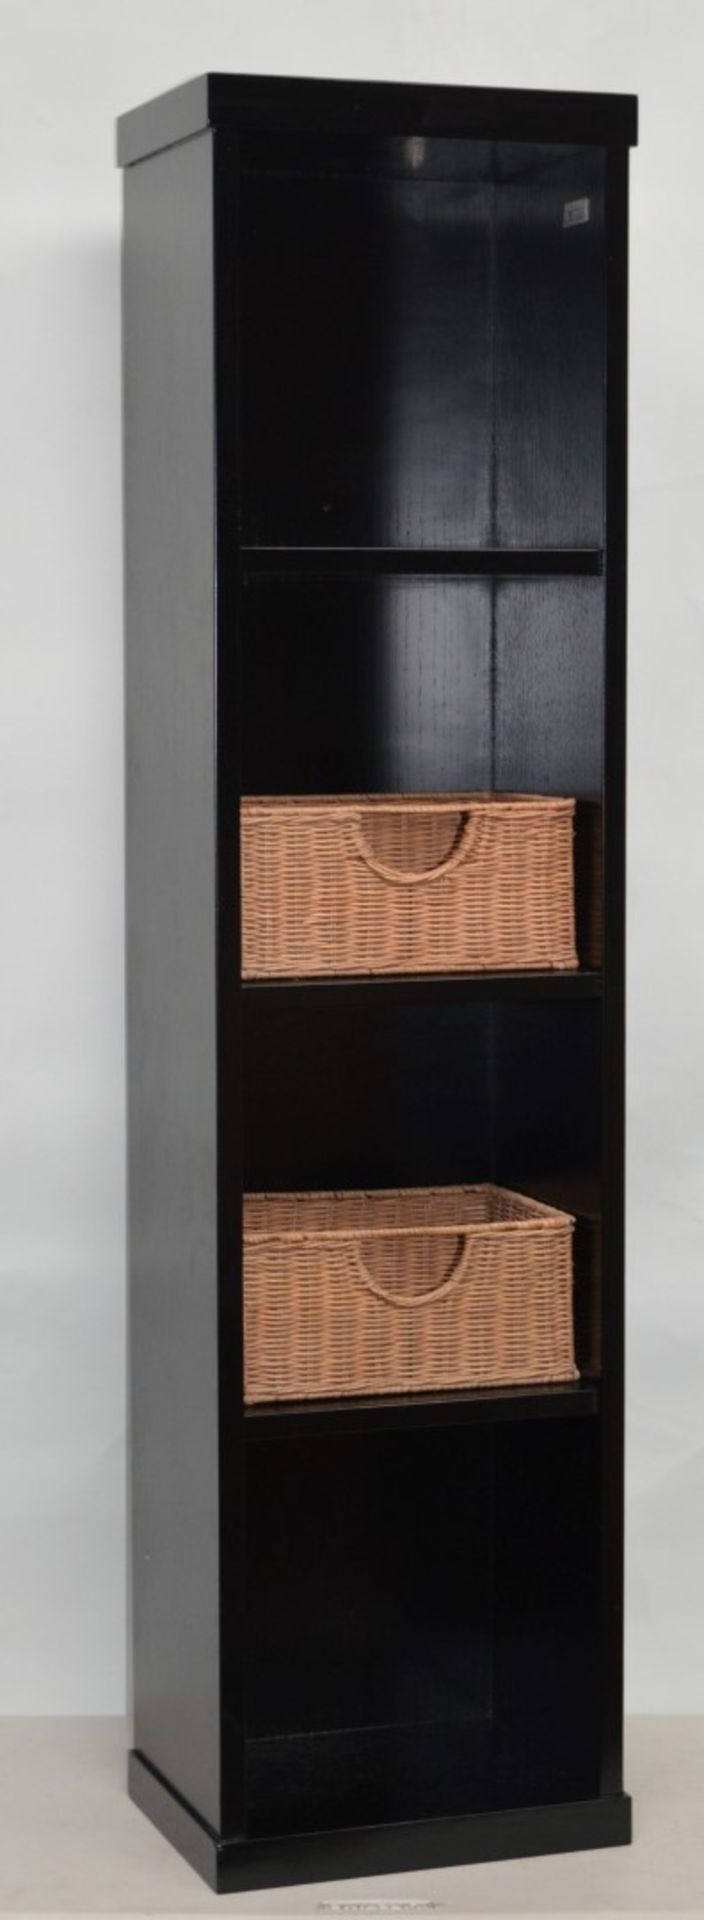 1 x Vogue ARC Series 2 Bathroom Storage Shelving Unit - Wall Mounted or Floor Standing - WENGE - Image 8 of 10